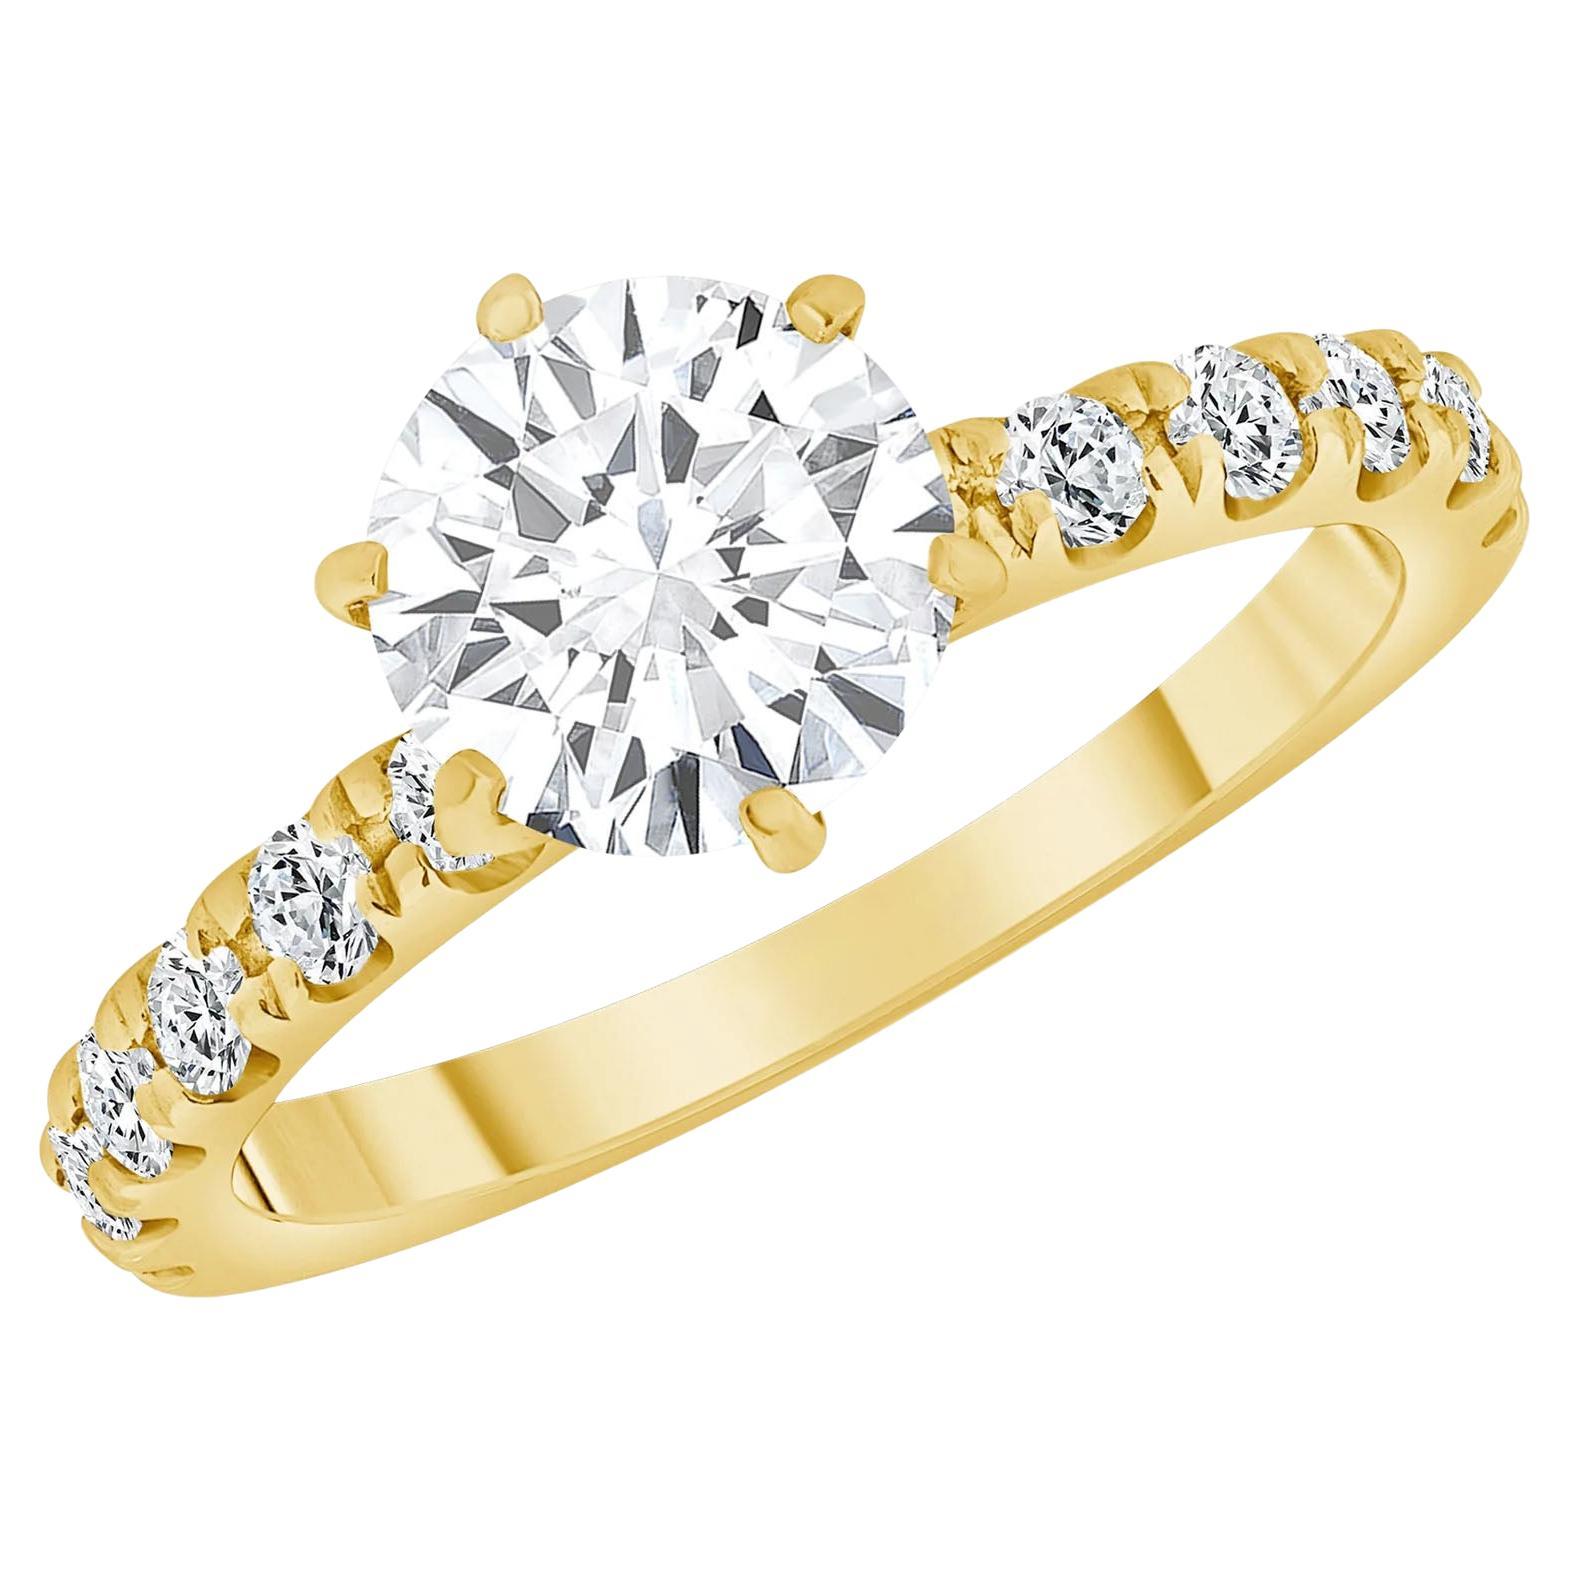 Rylie's Solitaire Engagement Ring 6-prong Half-eternity